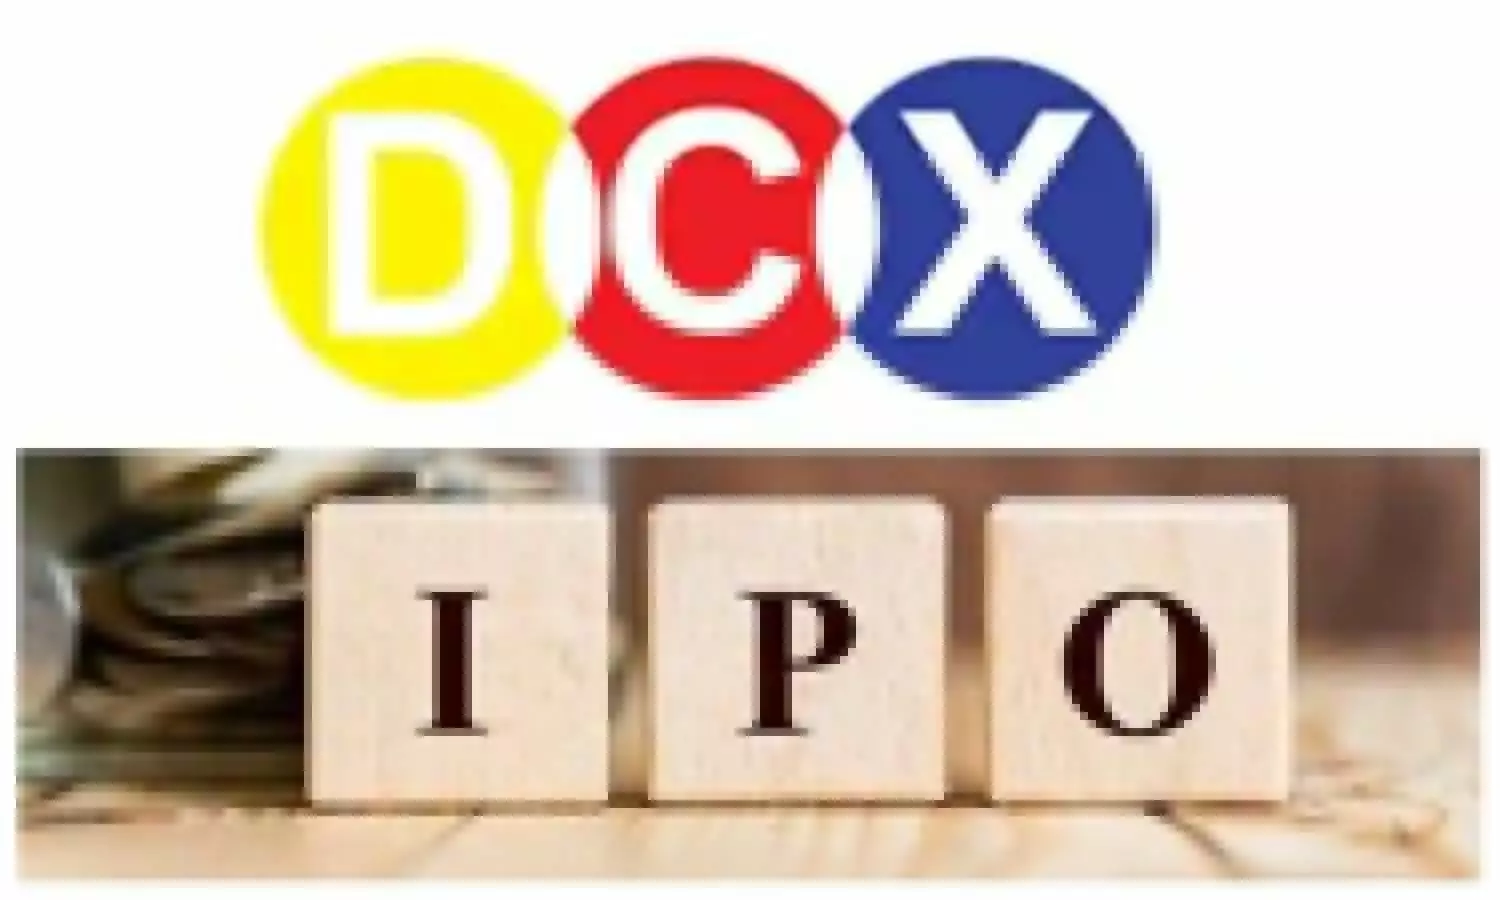 DCX Systems IPO